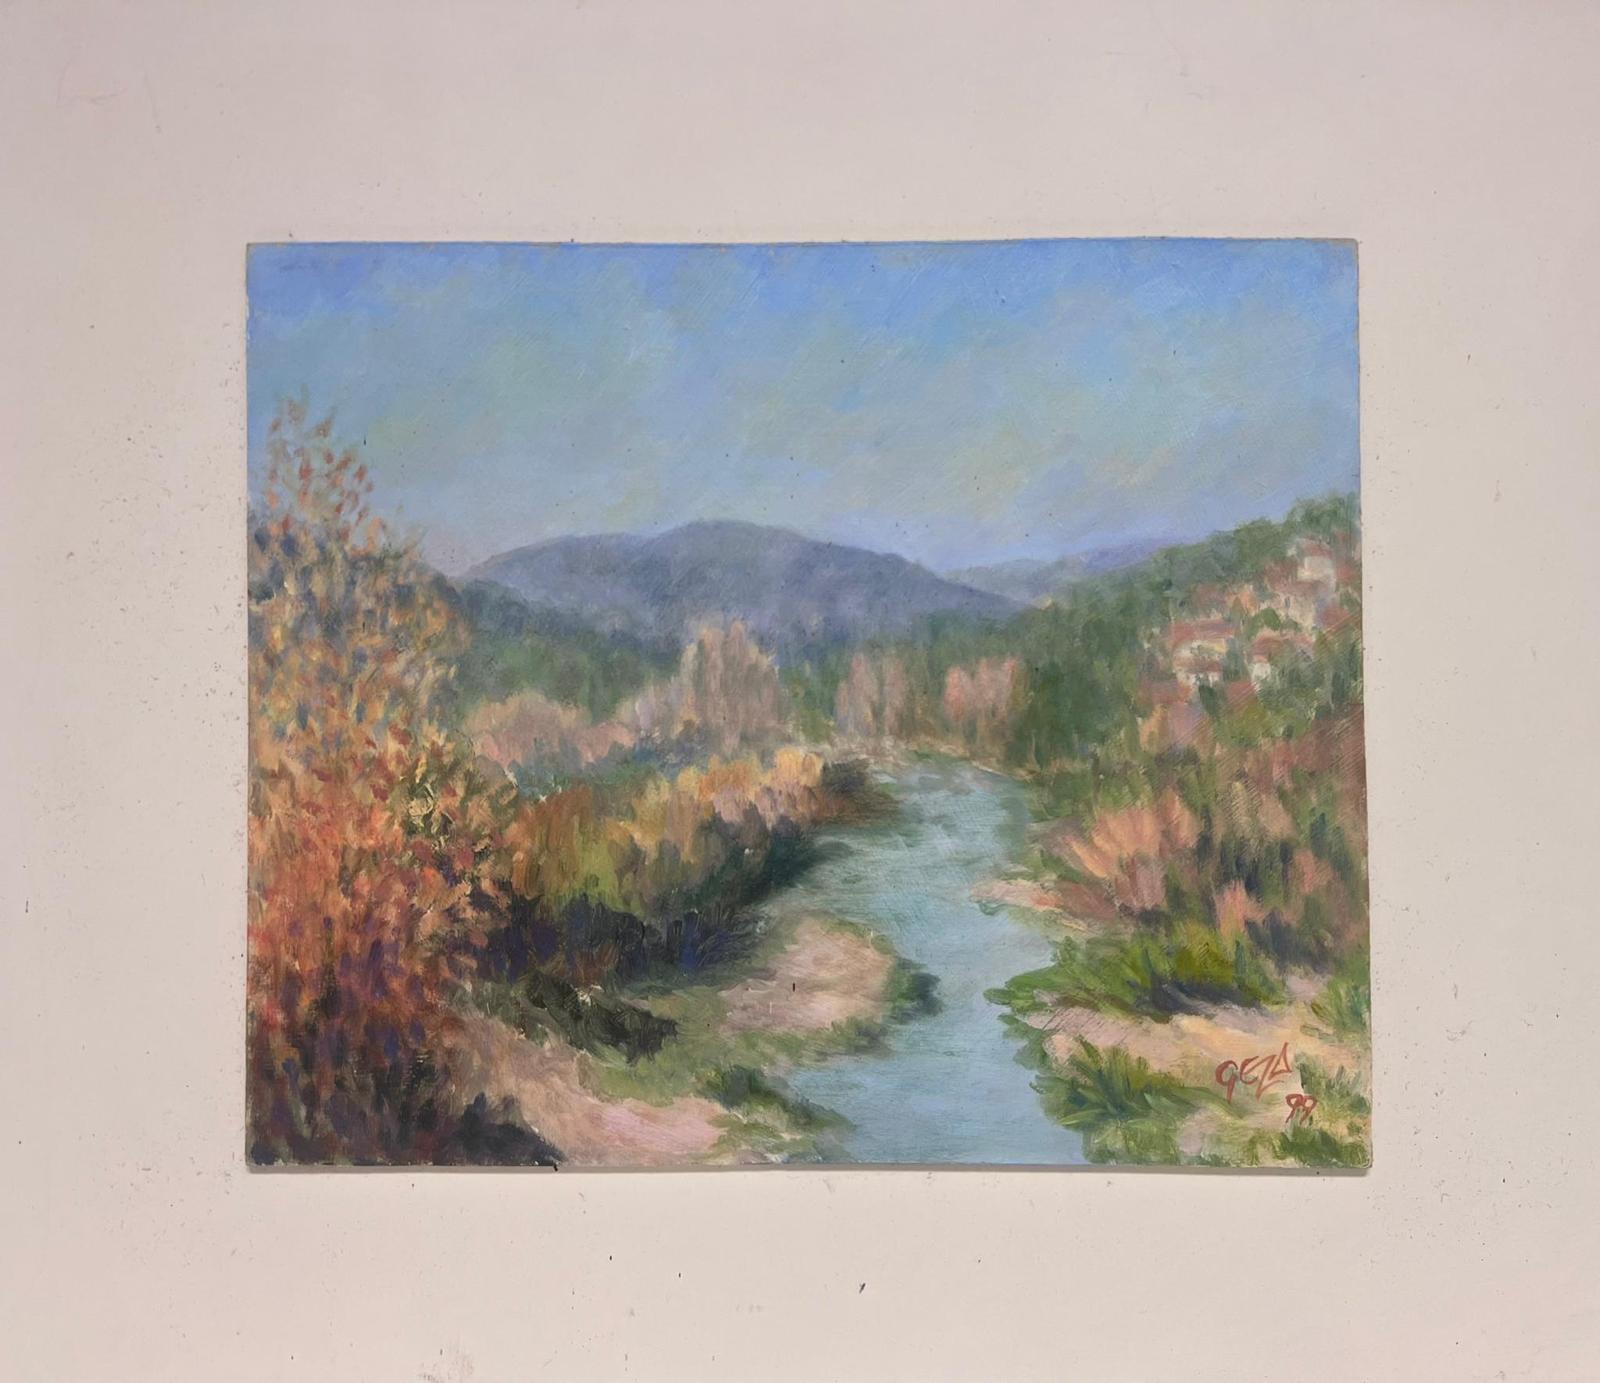 Landscape
signed by Geza Somerset-Paddon (British 20th century)
dated 98'
oil painting on board, stuck on board
overall board size: 16 x 18 inches
board: 10 x 12 inches
condition: overall very good
provenance: all the paintings we have by this